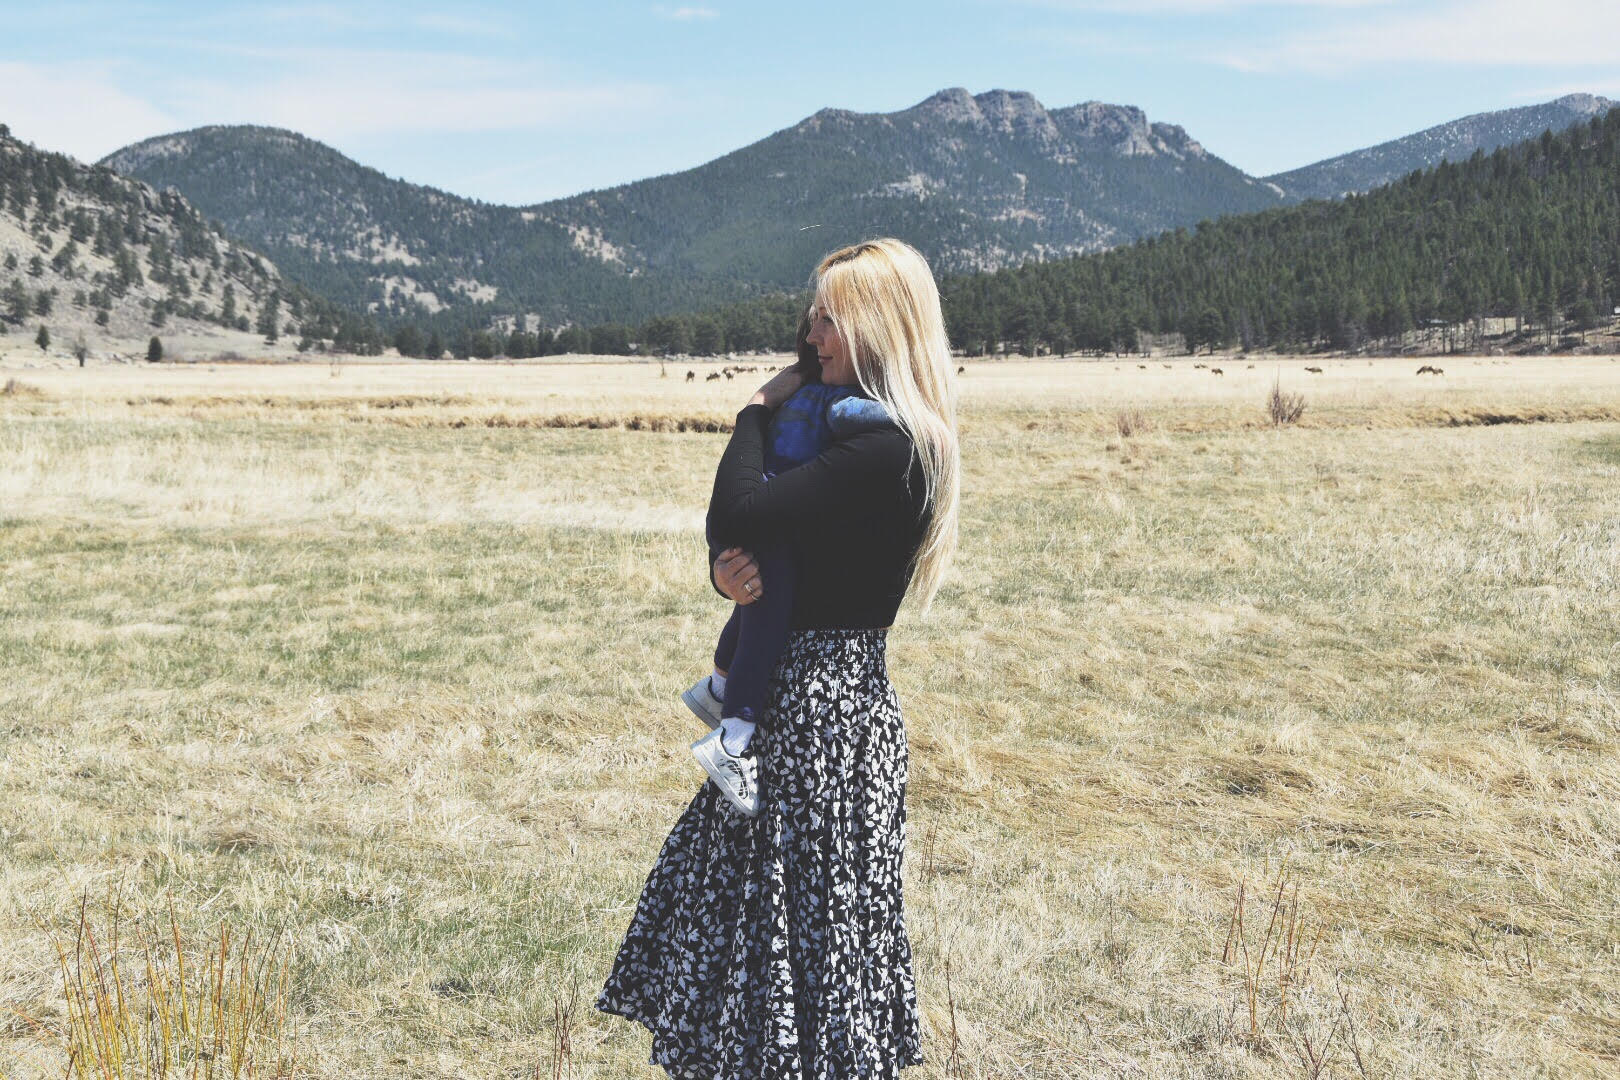 Mama and Child hug in front of mountains